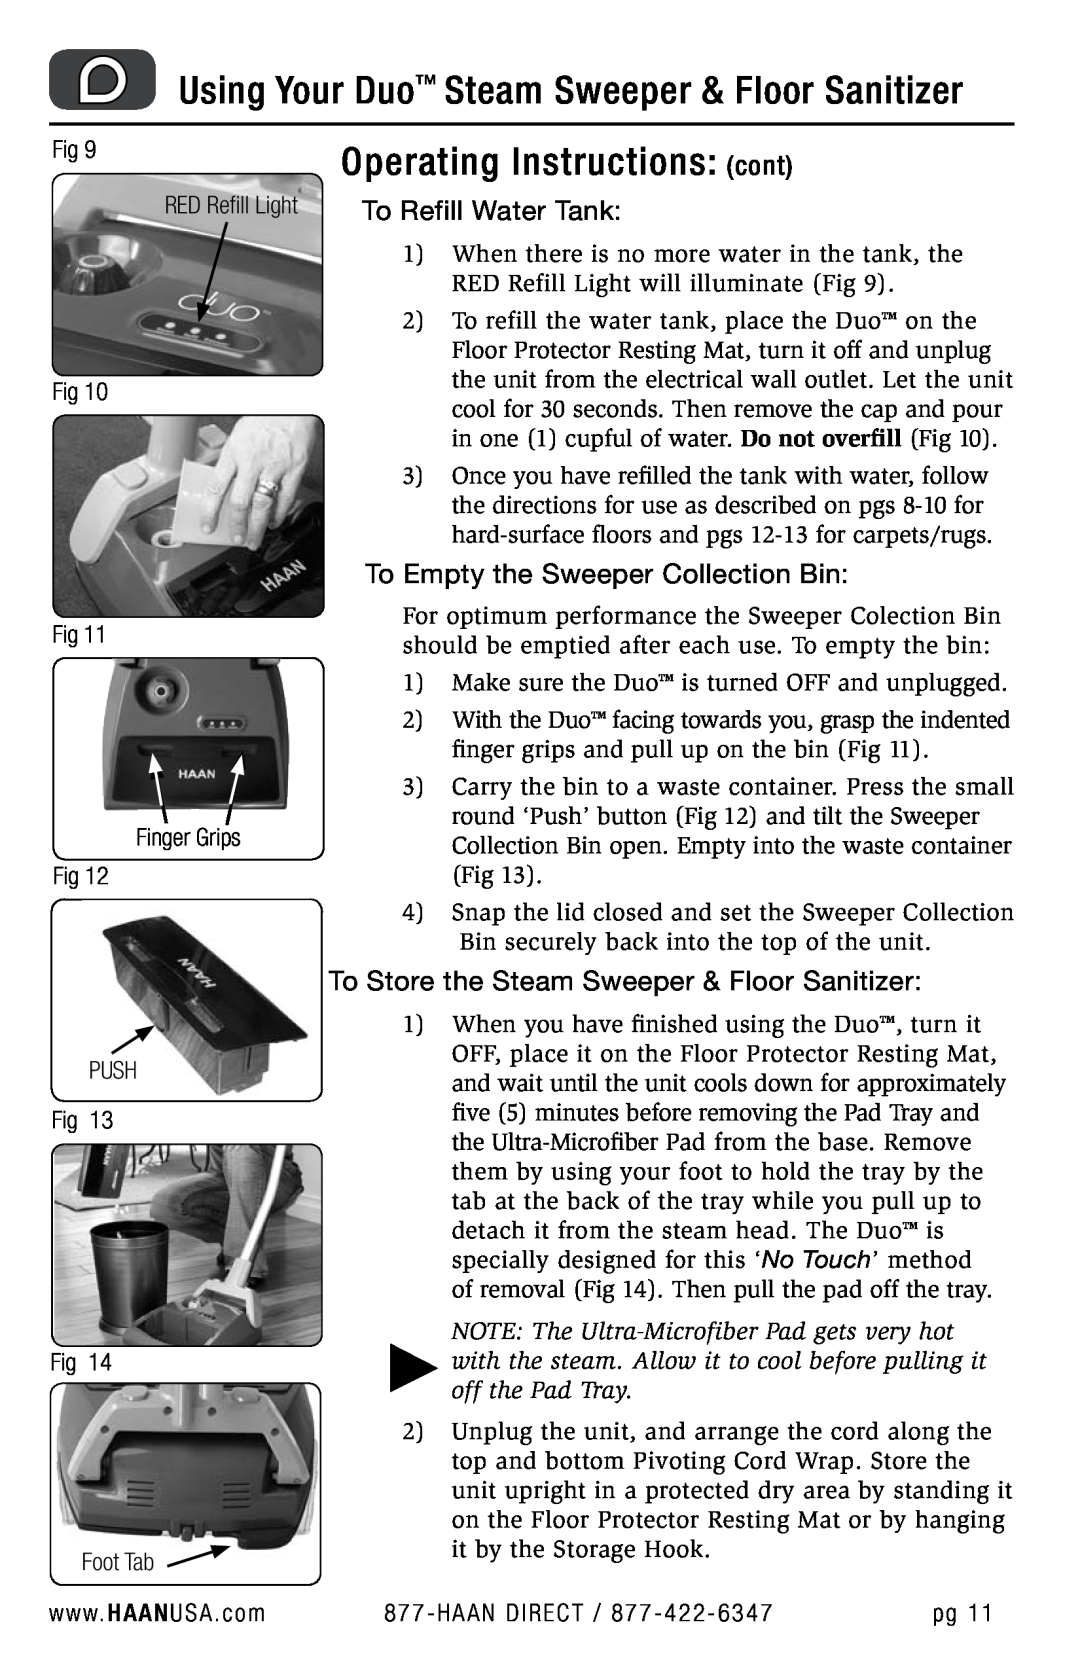 Haan HD-50 user manual Using Your Duo Steam Sweeper & Floor Sanitizer, Operating Instructions cont, To Refill Water Tank 